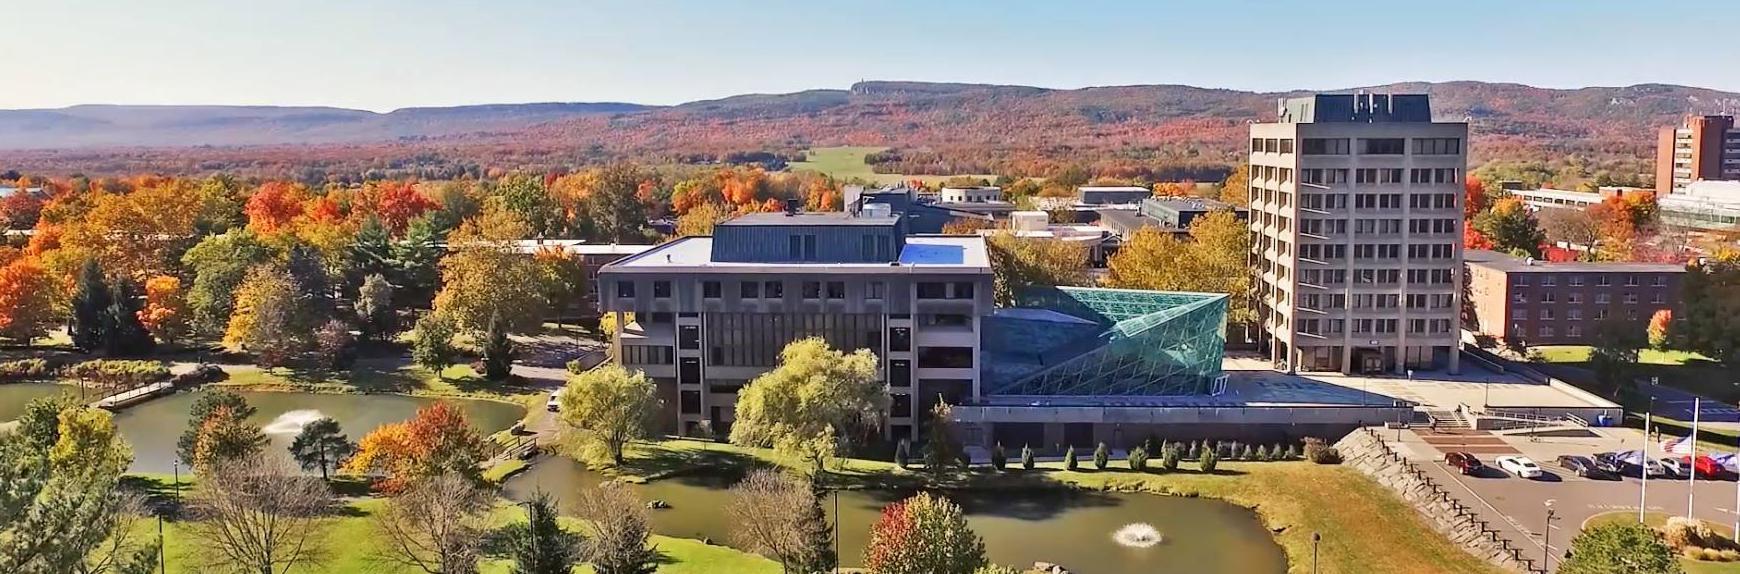 SUNY New Paltz Visitors Guide